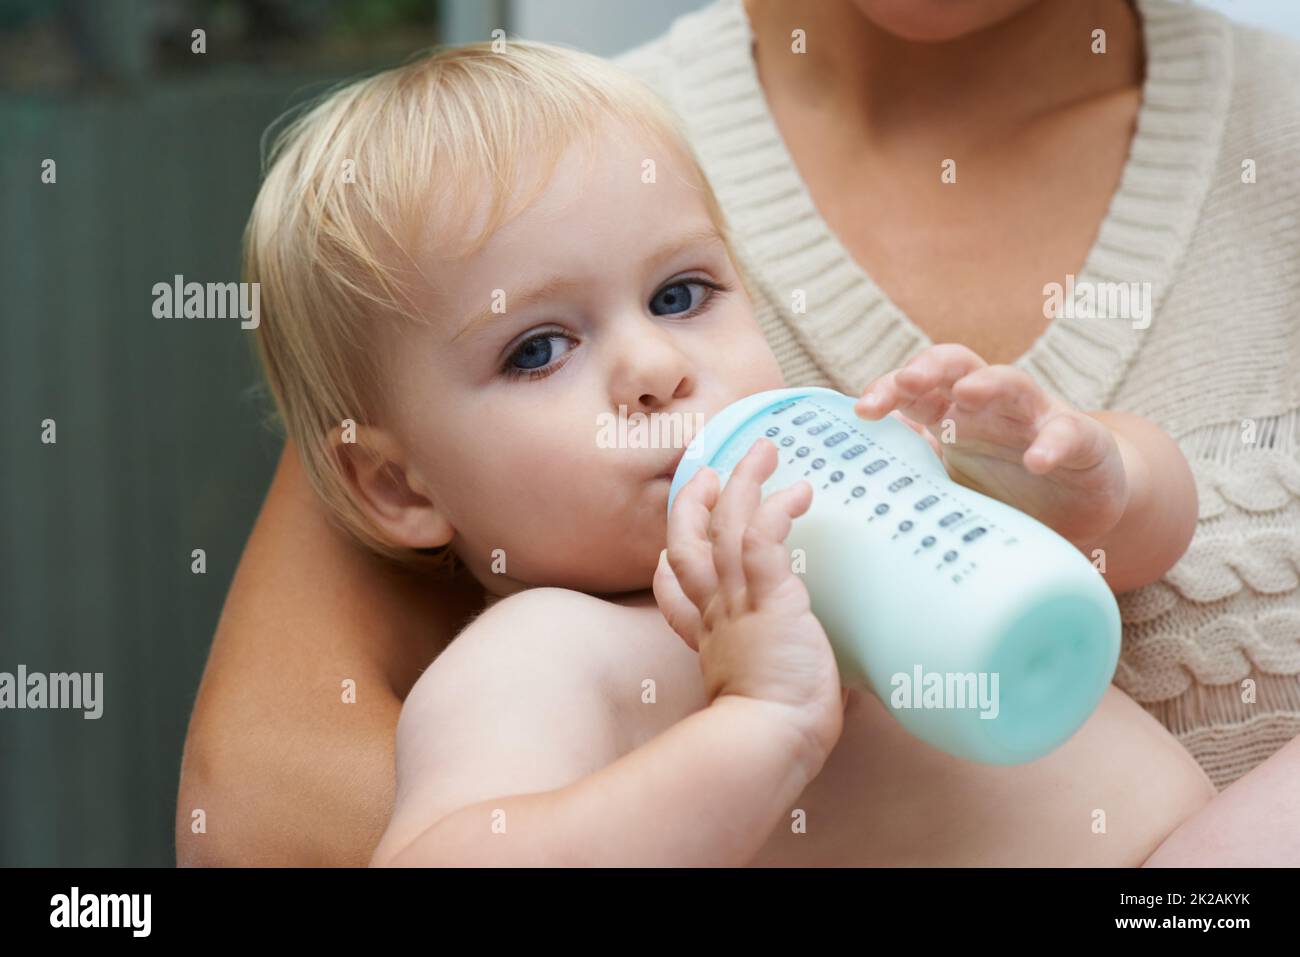 Safe in his mothers arms. A baby boy drinking milk from his bottle while being held by his mother. Stock Photo